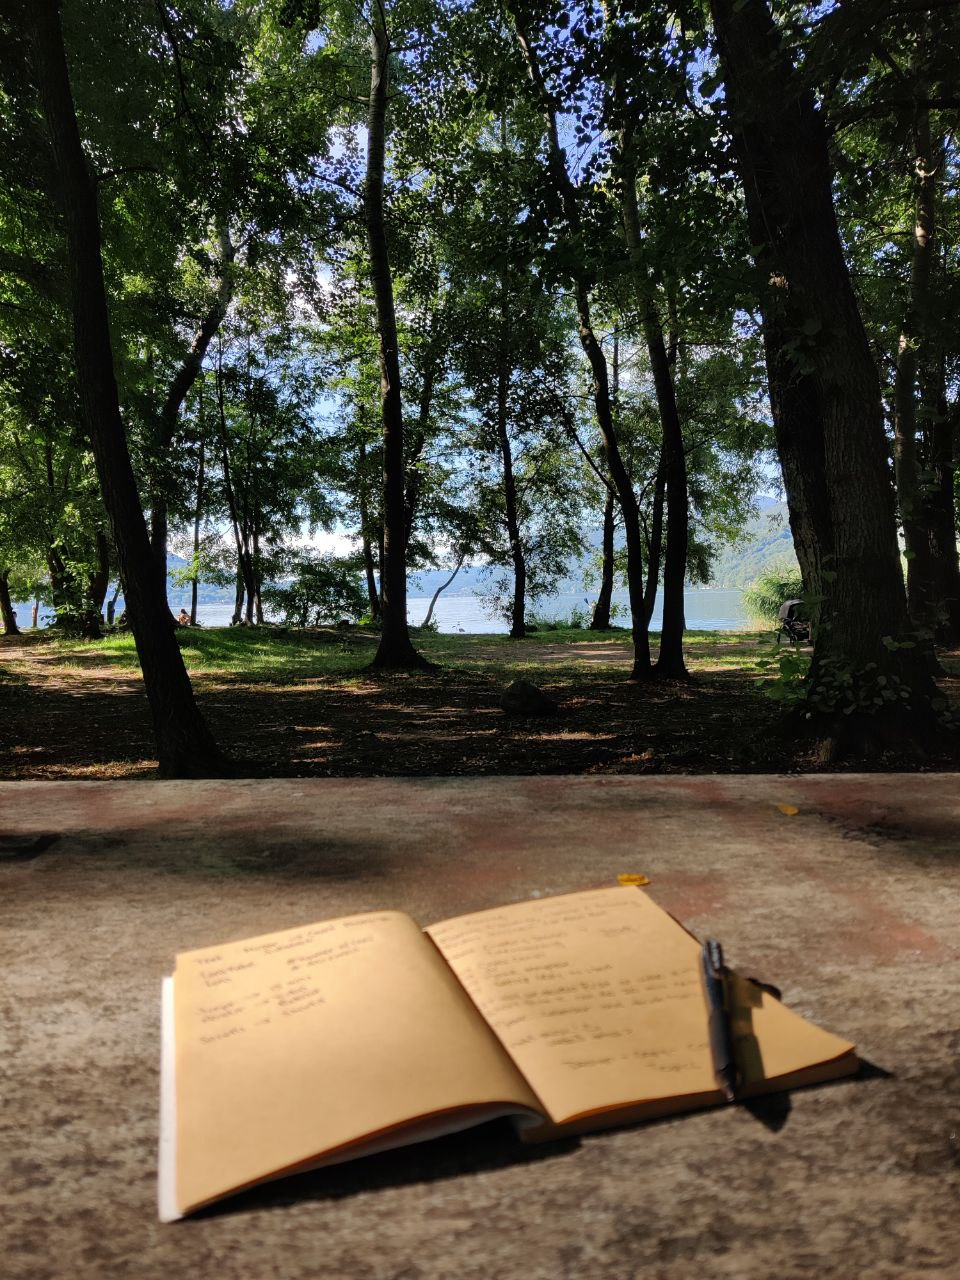 Nothing beats free thoughts brought to a pen and paper - in nature.